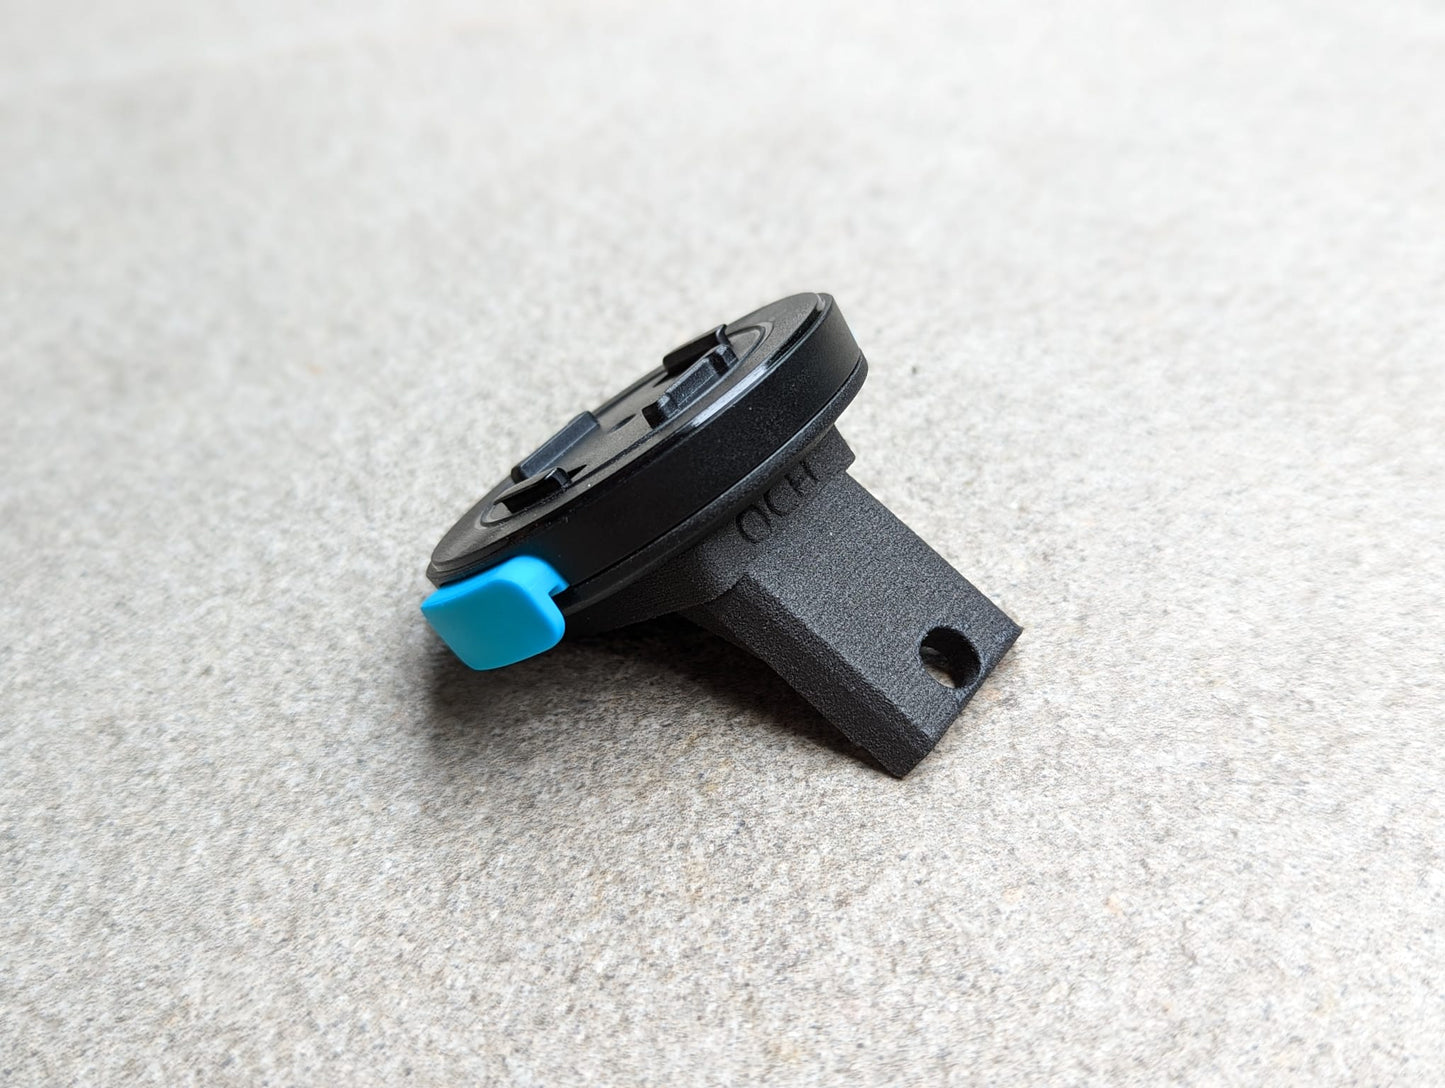 Mous Intralock Stem Adapter For Brompton